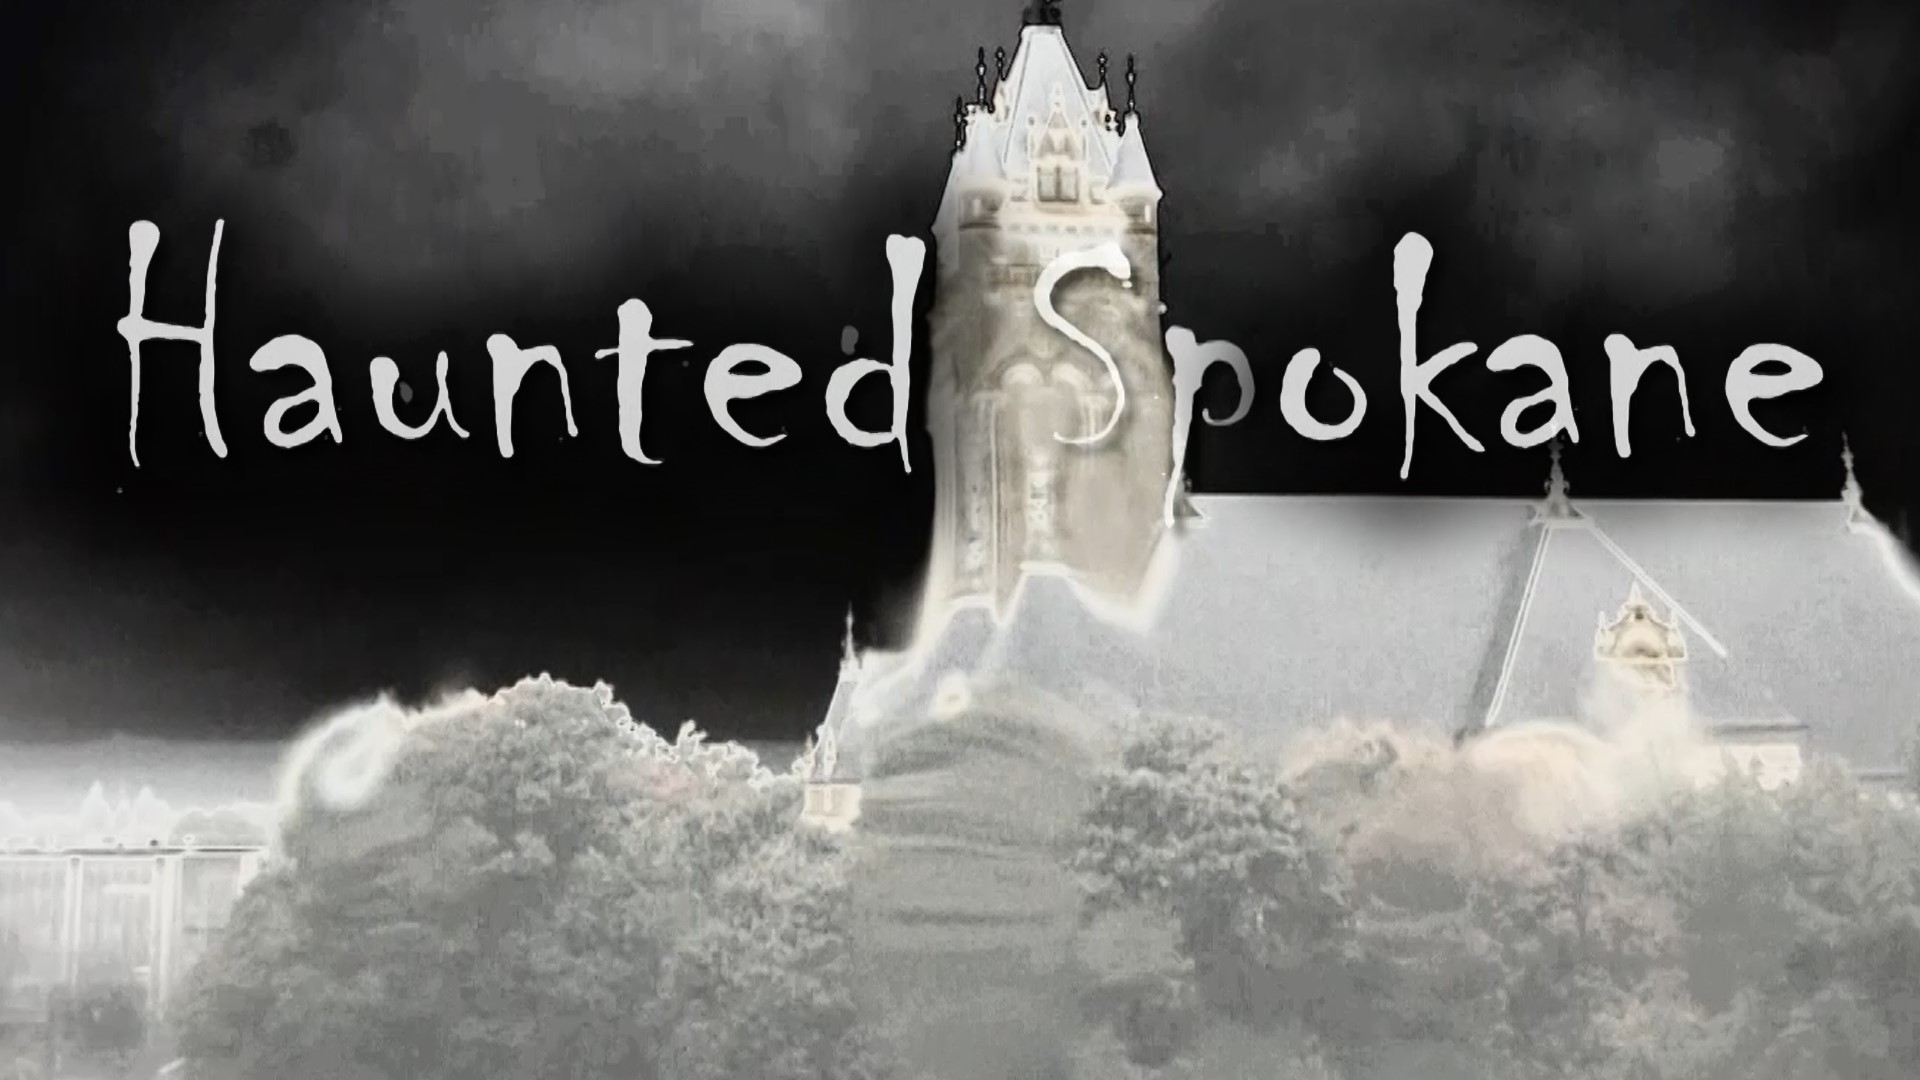 Ghosts, haunted hotels, spooky steps, cursed mansions, and more. Haunted Spokane takes you on a tour of some of the spookiest spots in the Lilac City.